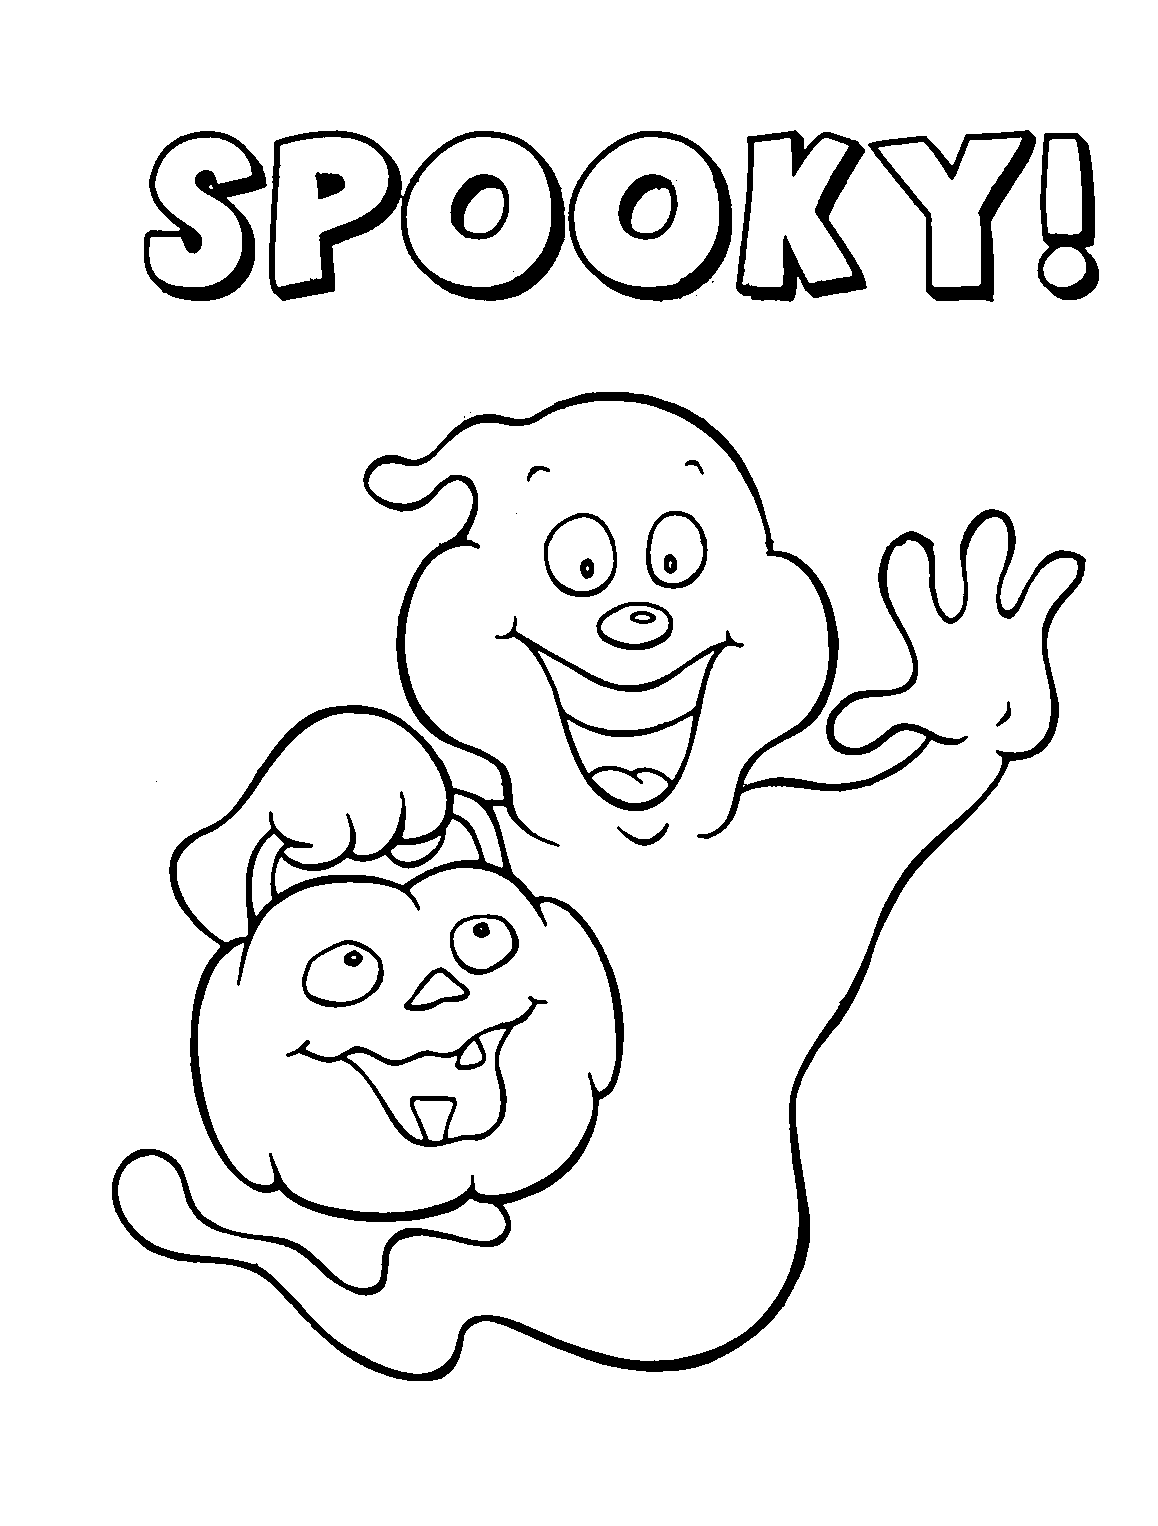 halloween coloring pages to color online coloring ville coloring halloween pages online to color 